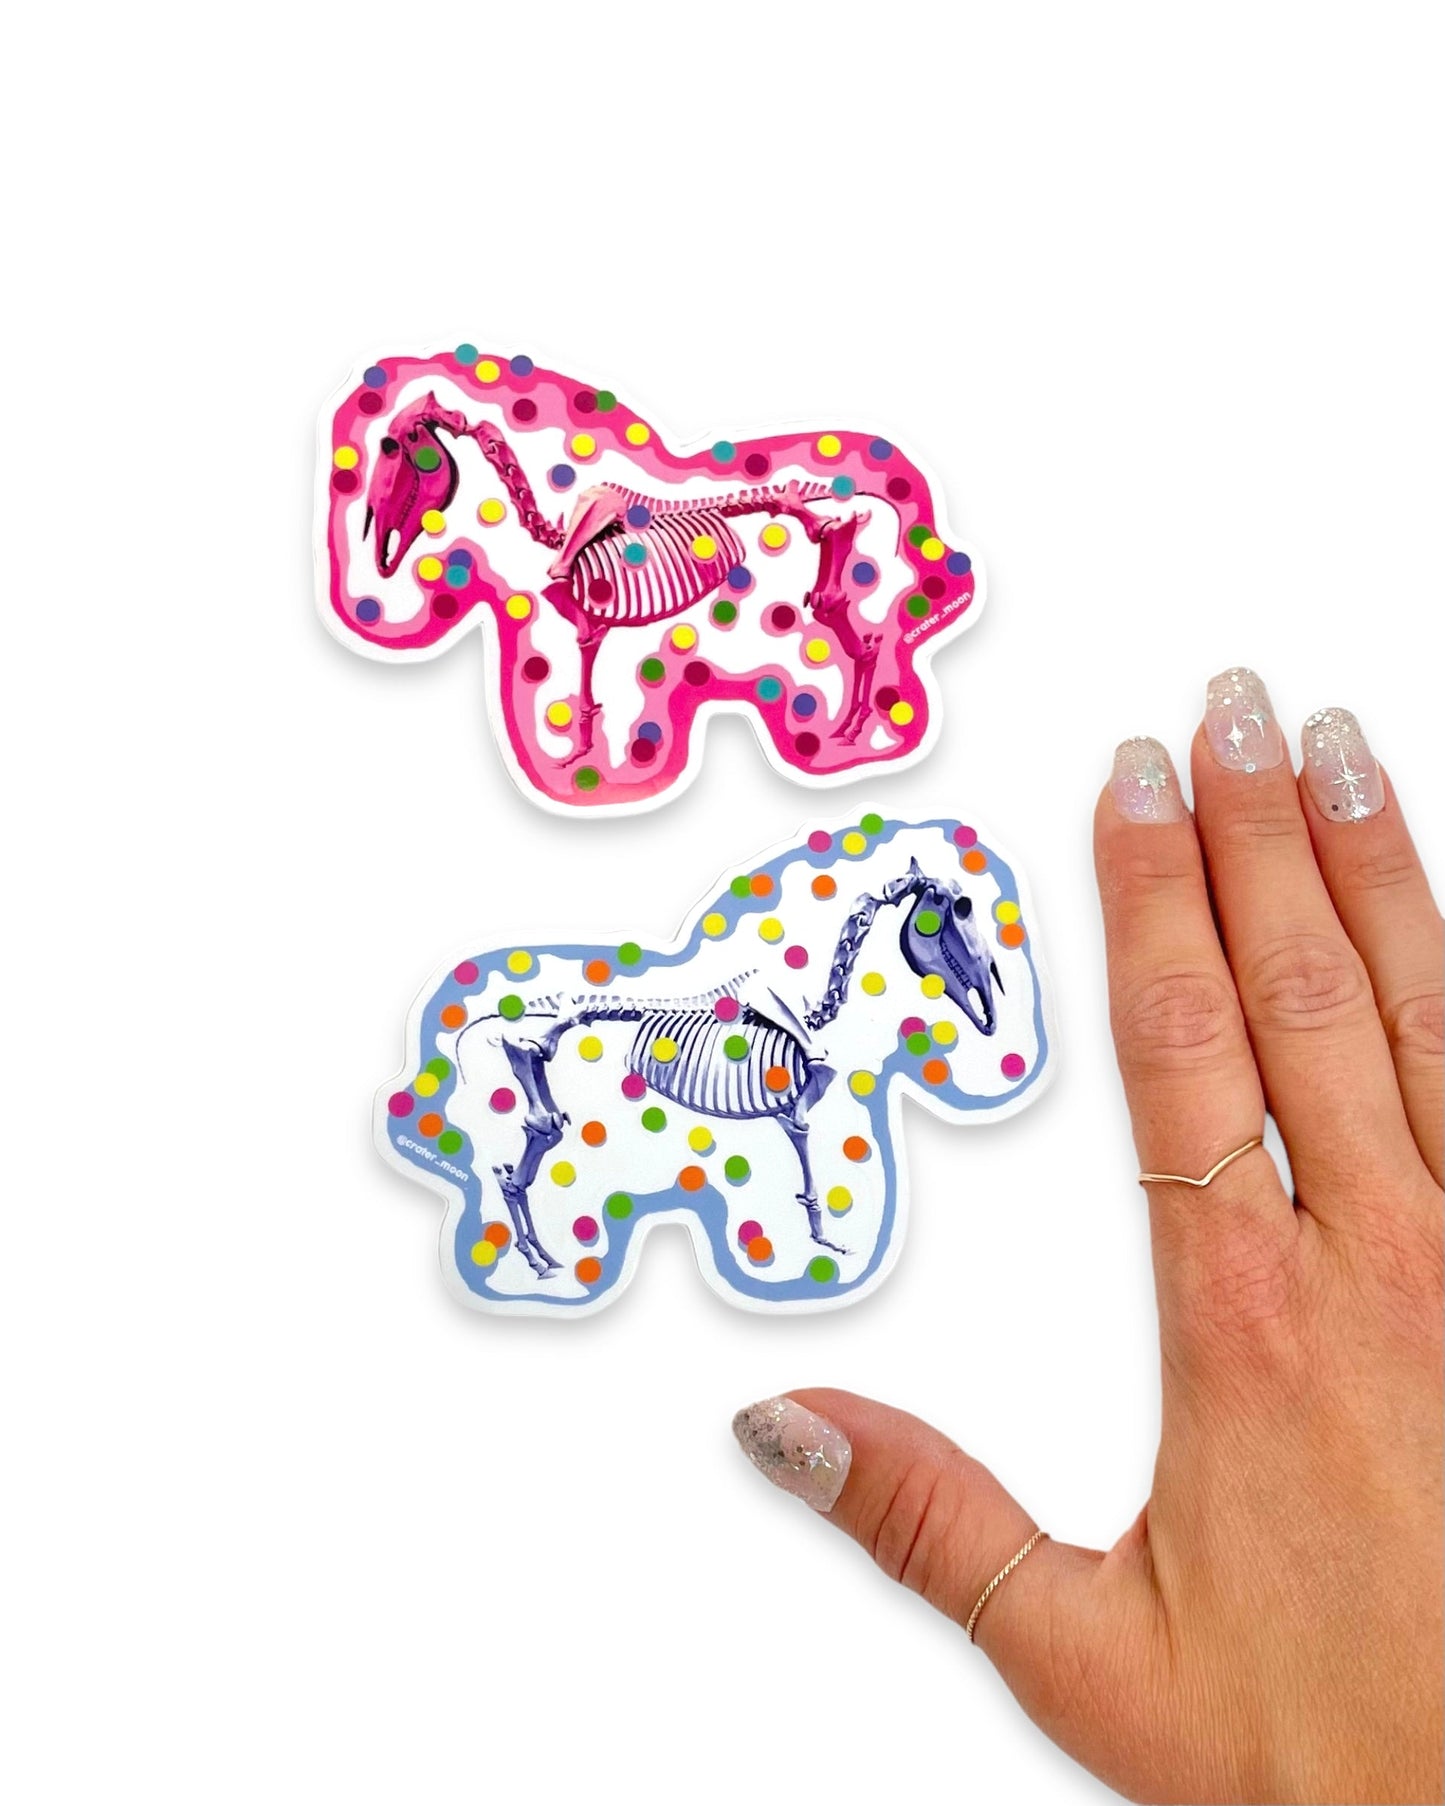 Super Savings! 10-pack Sticker Collection!! Clear, Sparkly, and Holographic Stickers